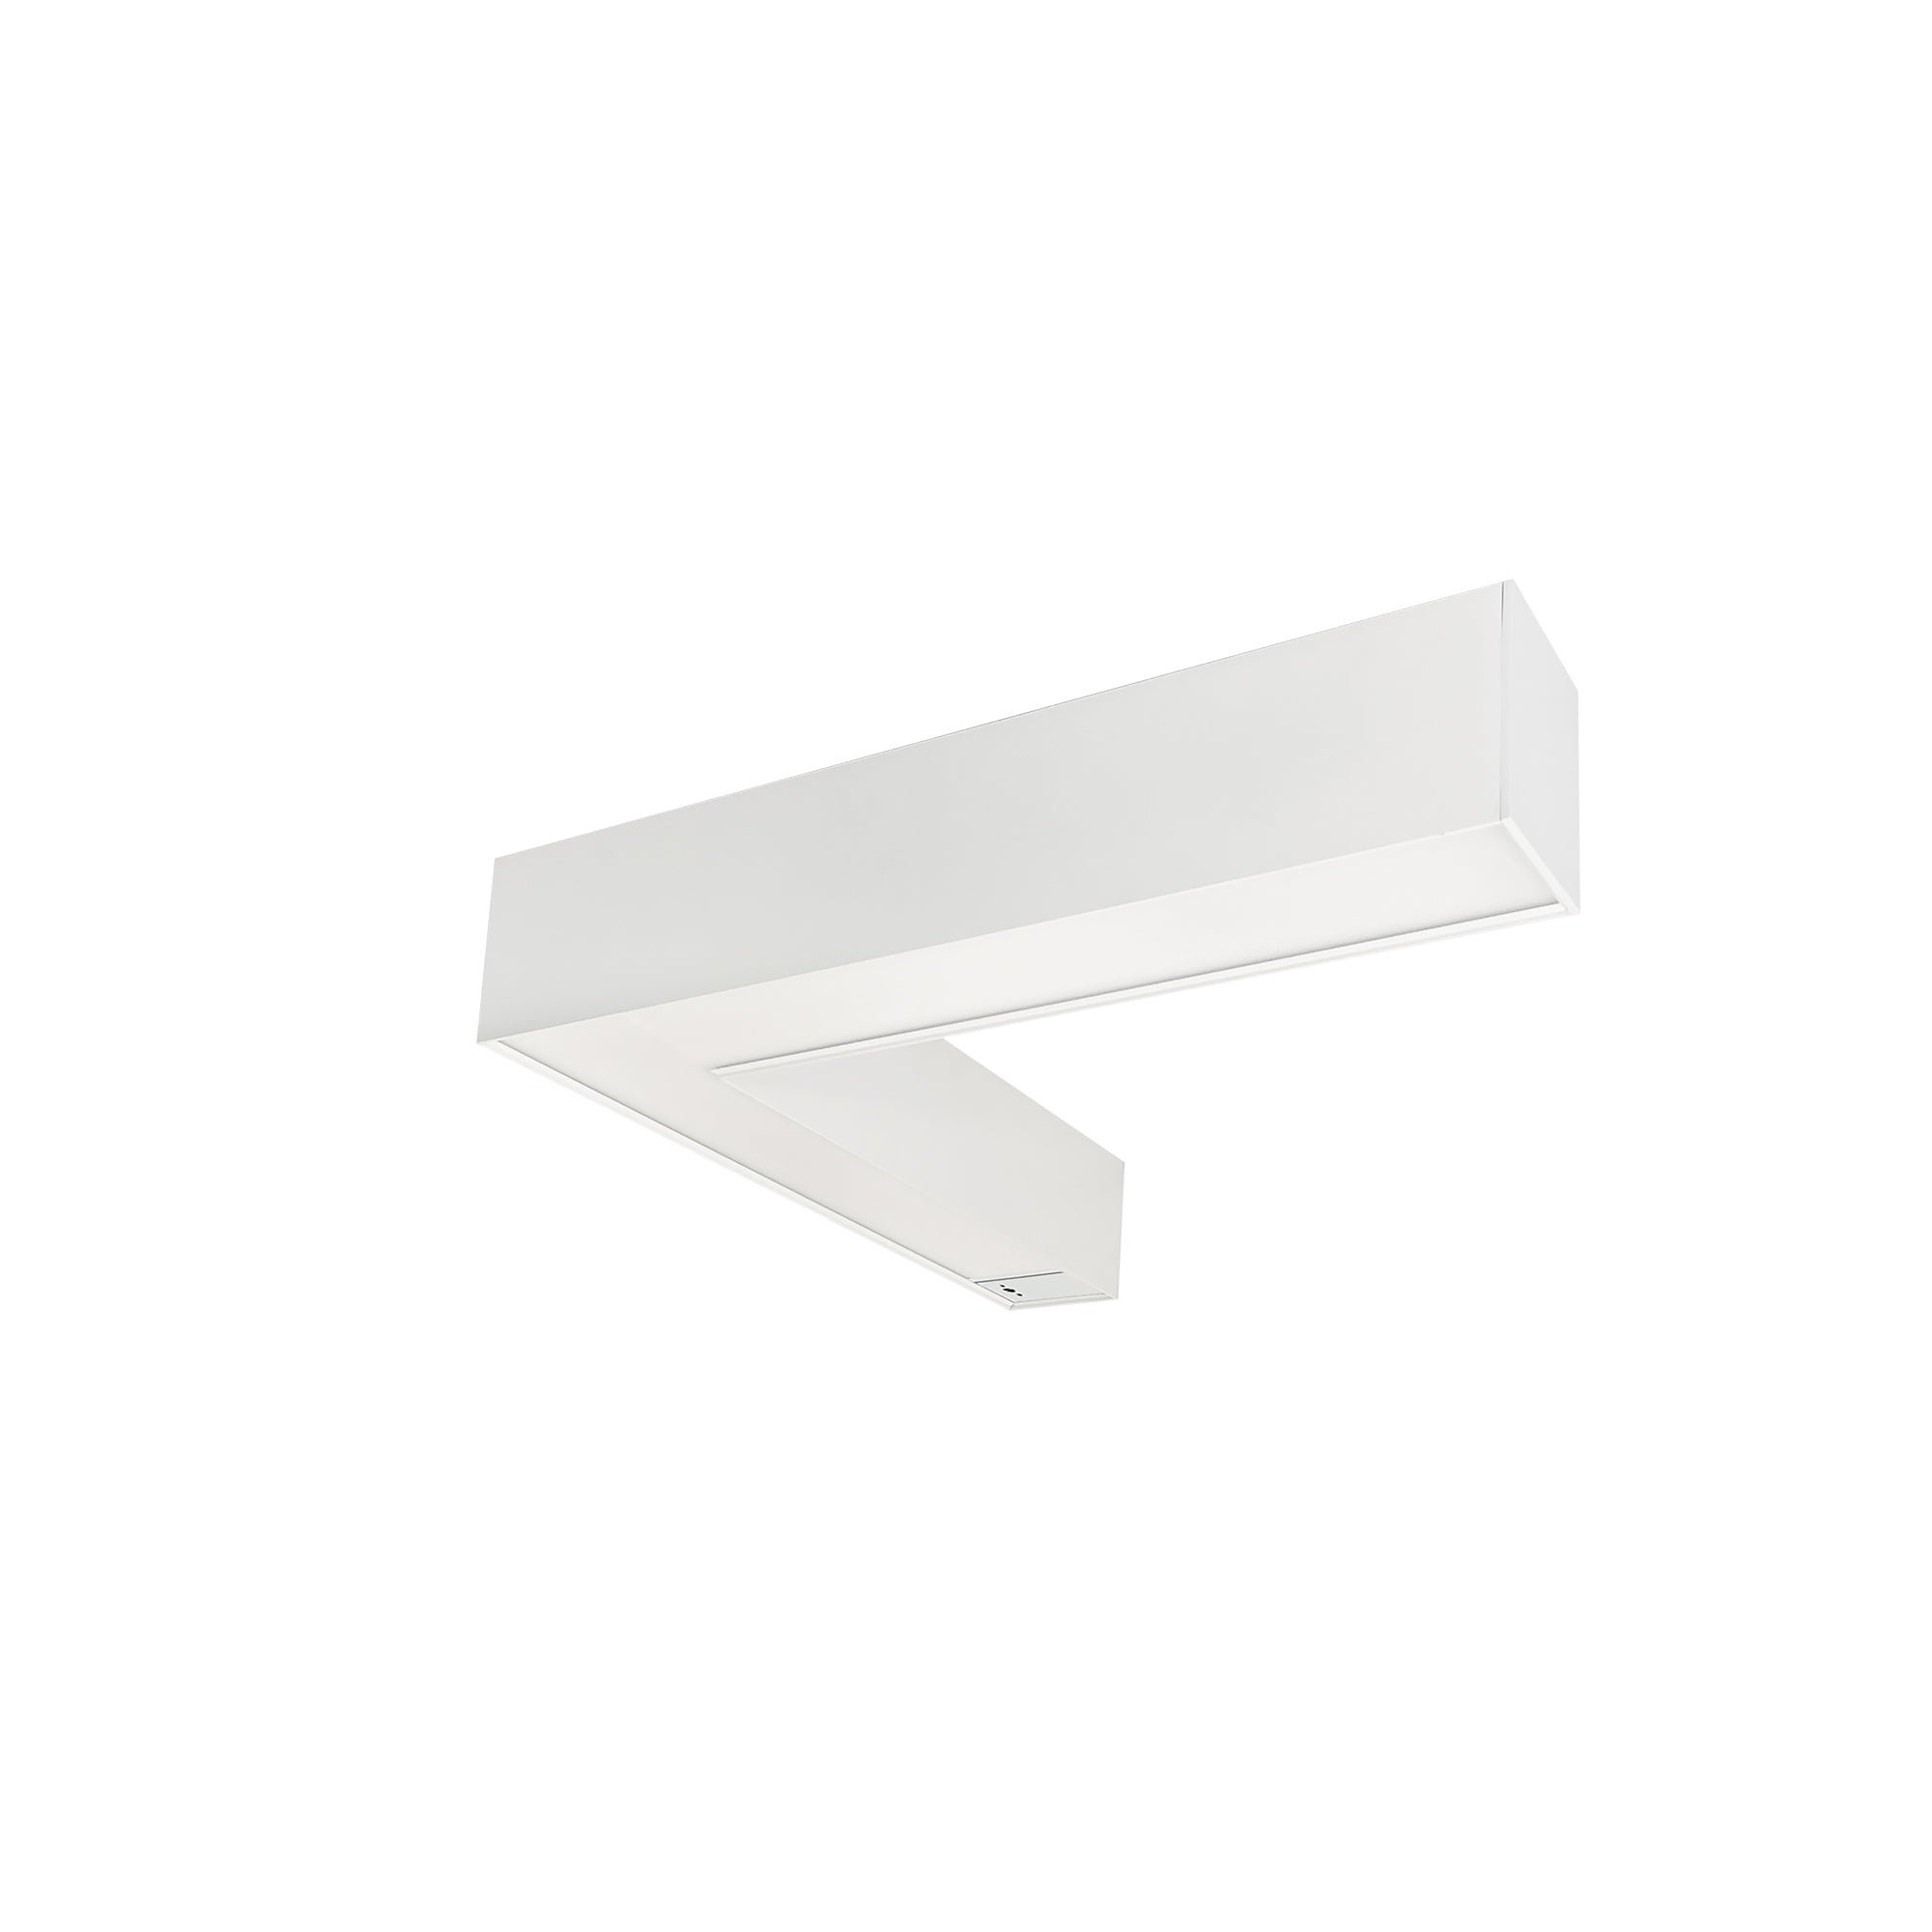 Nora Lighting NLUD-L334W/OS - Linear -  InchL Inch Shaped L-Line LED Indirect/Direct Linear, 3781lm / Selectable CCT, White Finish, with Motion Sensor